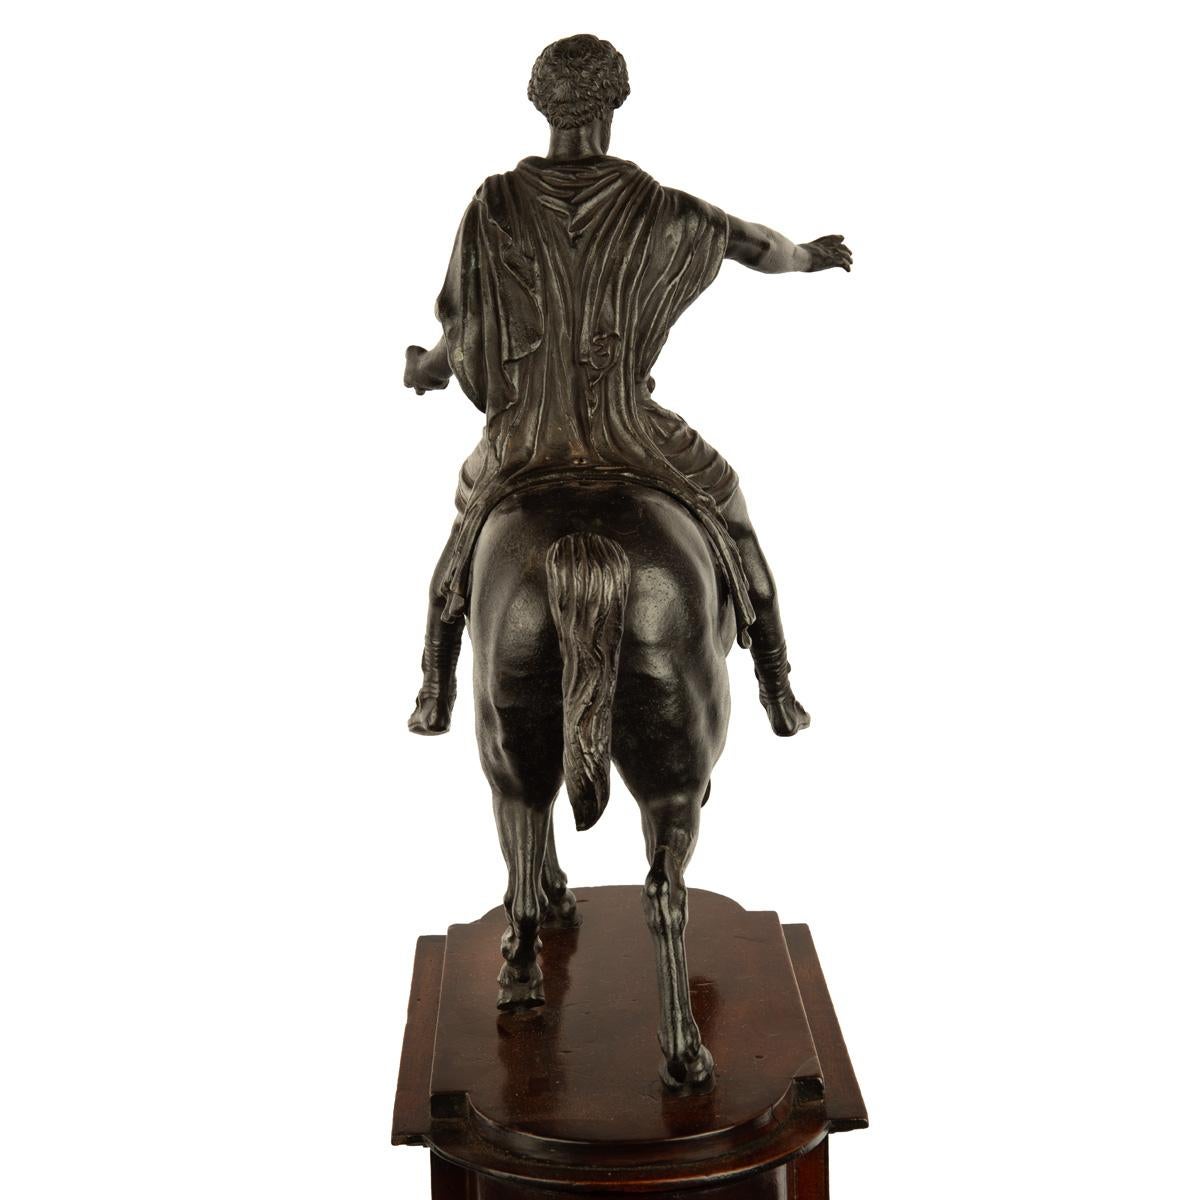 A Grand Tour equestrian bronze of Marcus Aurelius, after Hopfgarten, after the antique, shown astride a prancing horse with no reins and a Sarmatian saddlecloth with no stirrups, his right hand outstretched, raised on a shaped mahogany plinth inset